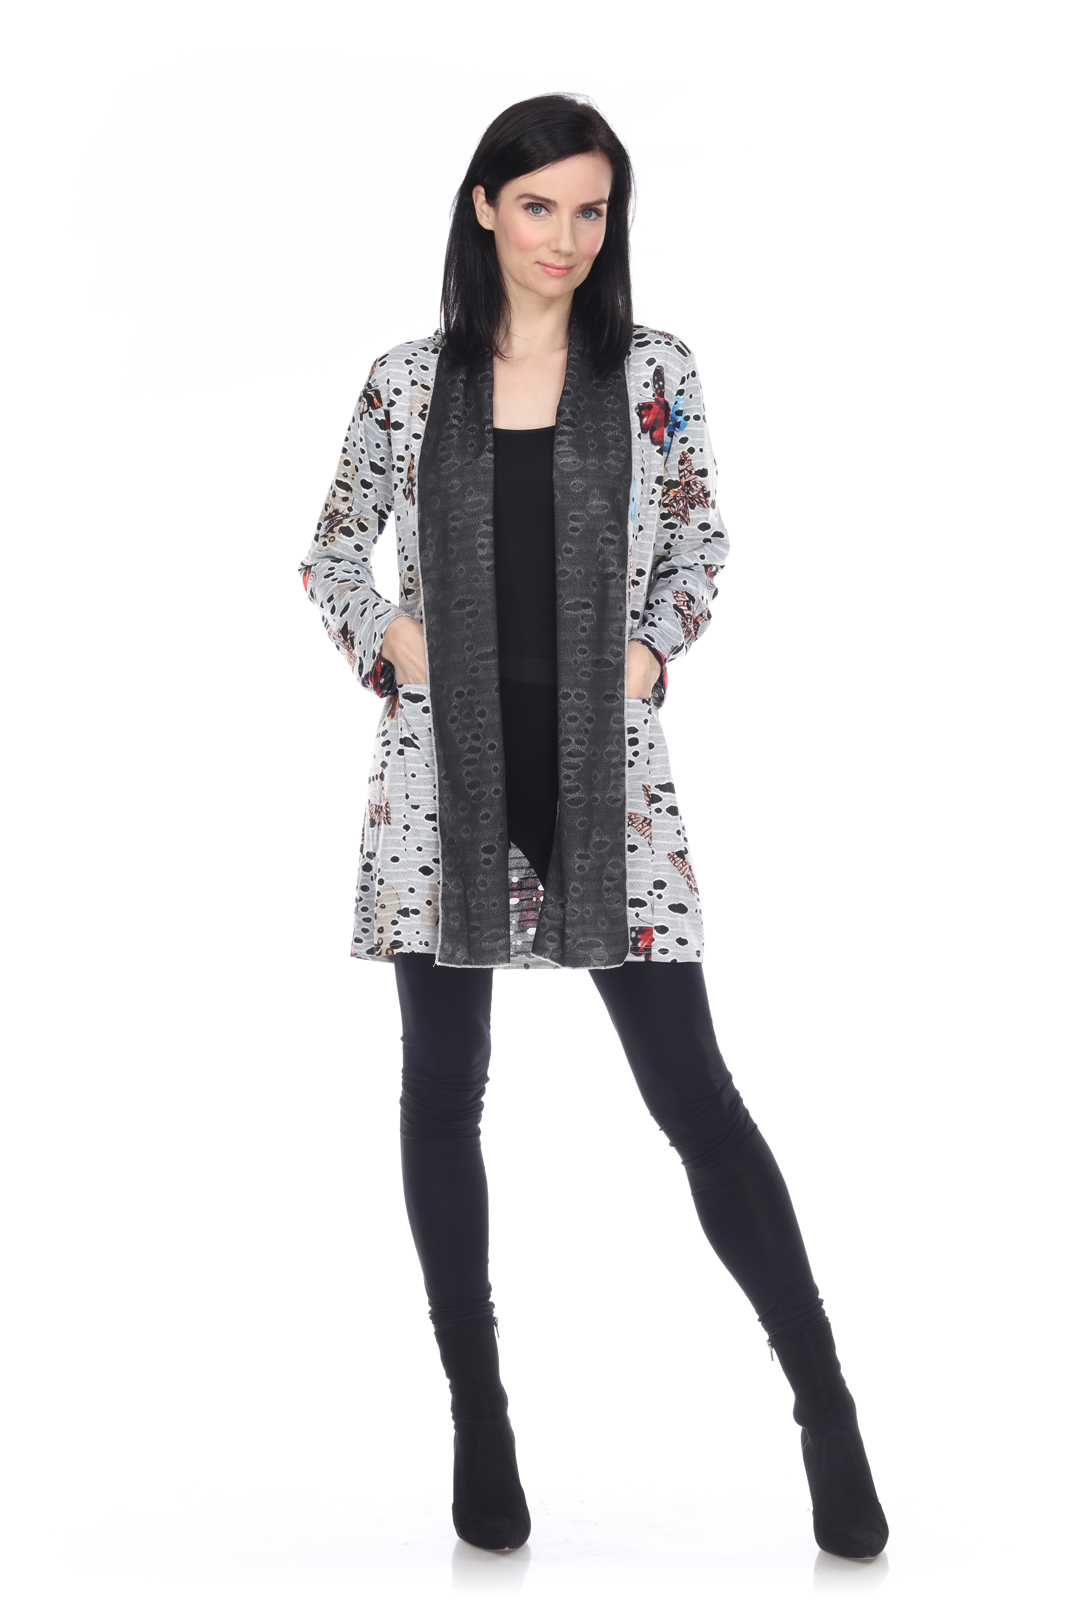 Butterfly Cardigan Cover Up Wholesale (KD2058)